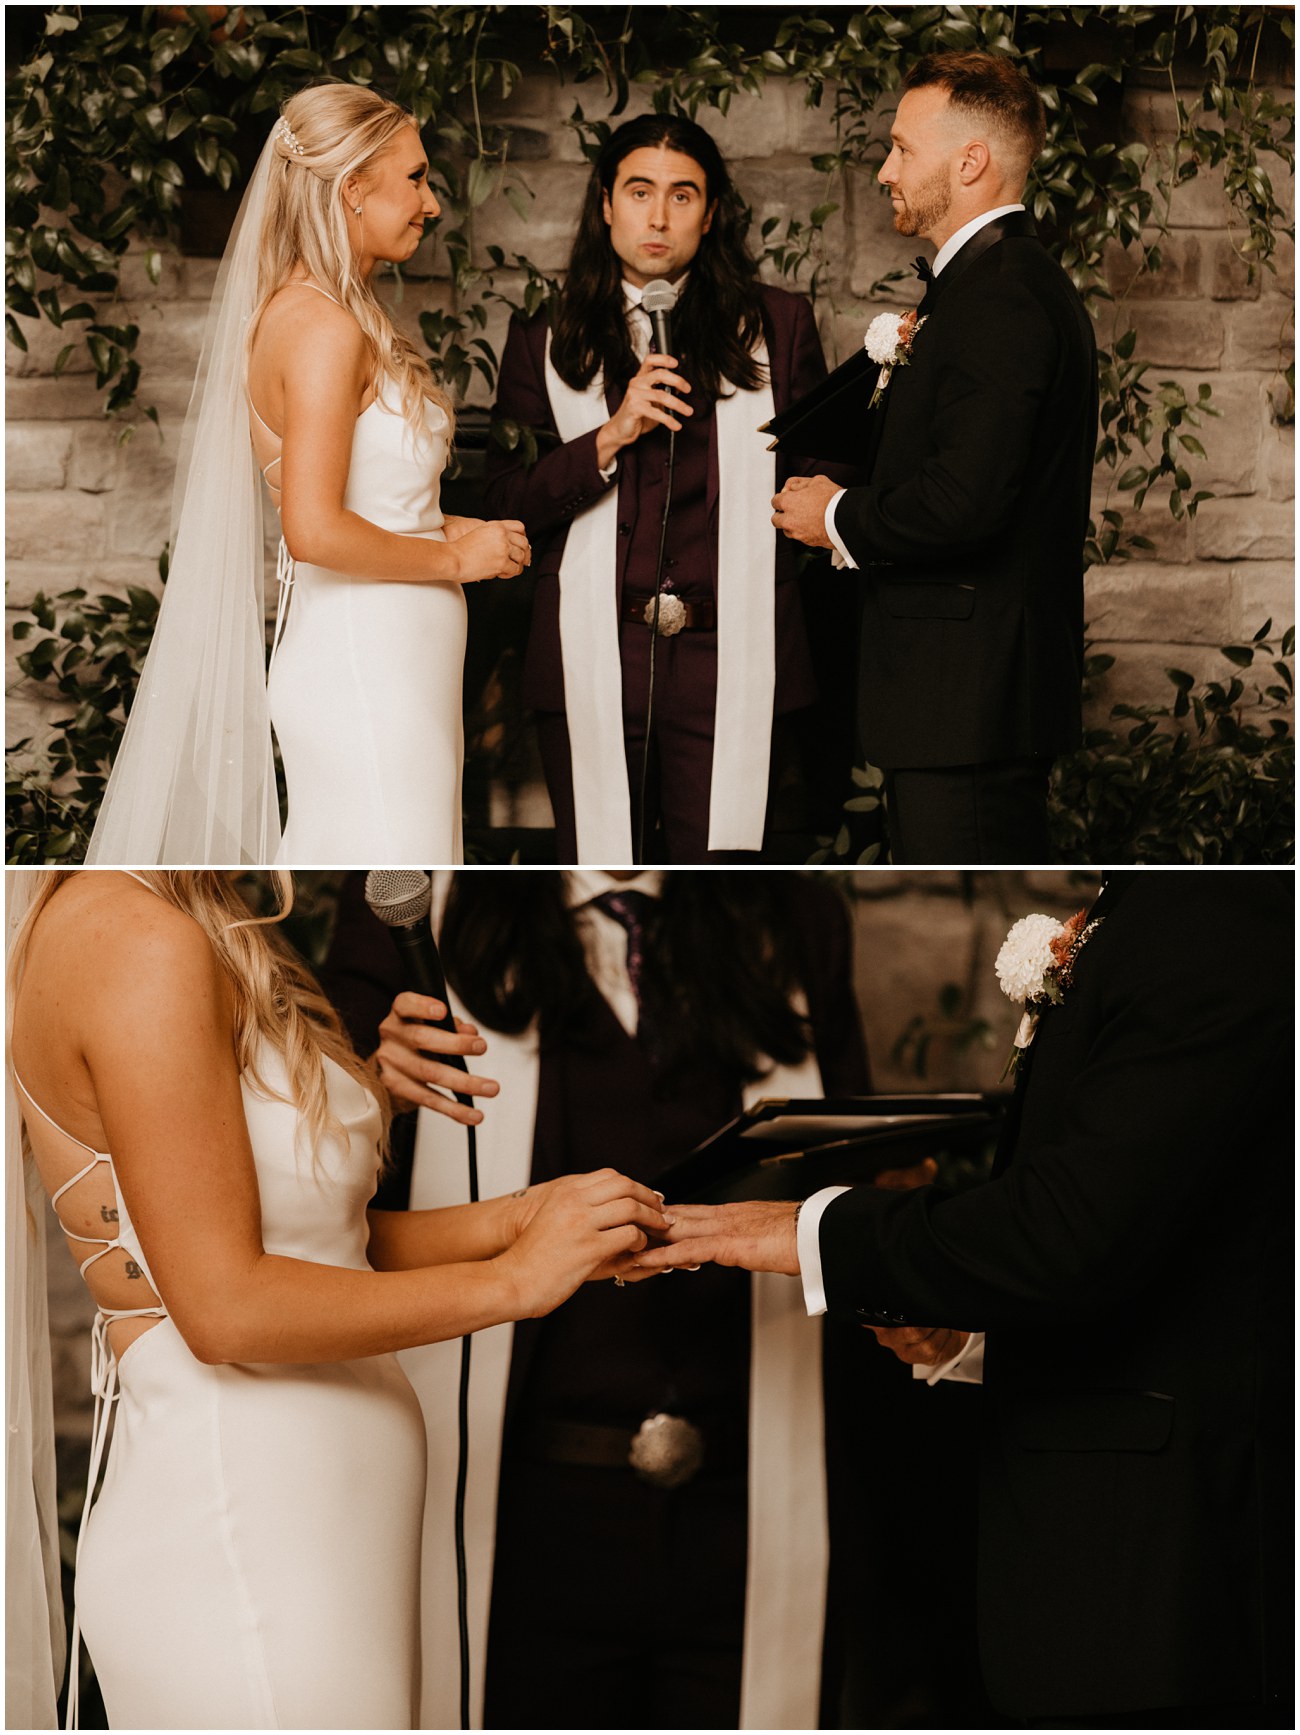 Bride puts on Groom's ring during wedding ceremony at Trout Lake wedding